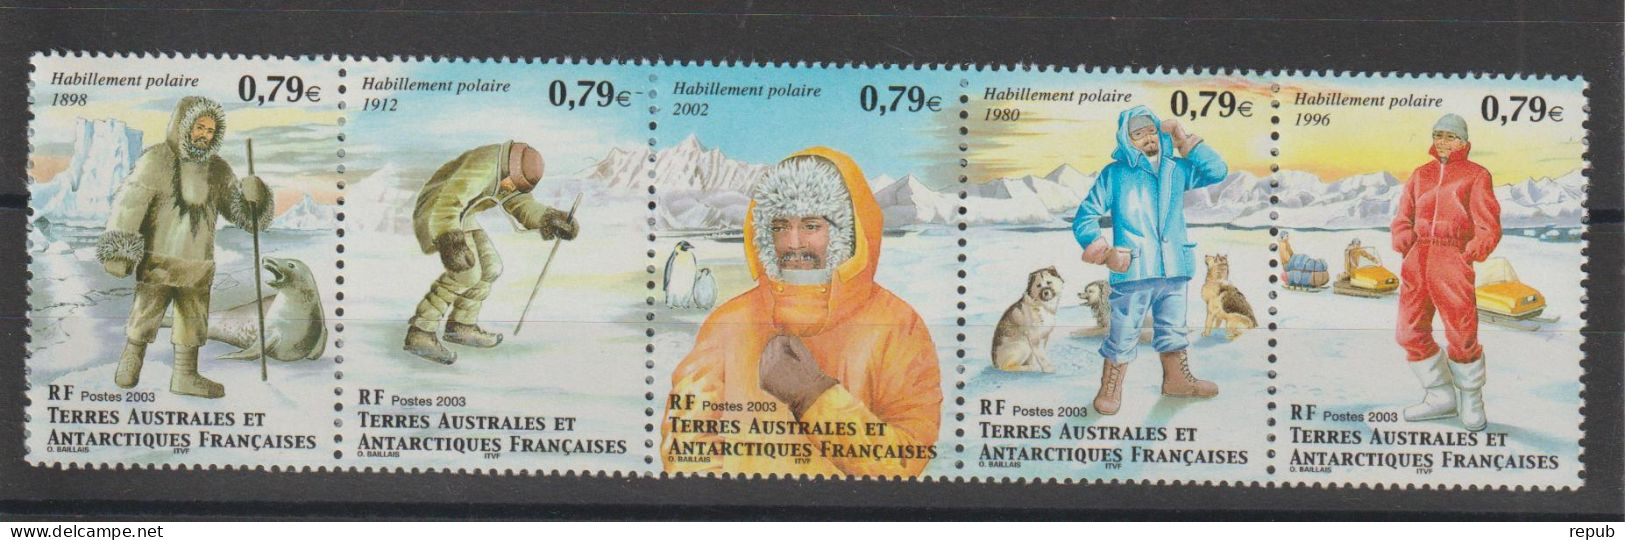 TAAF 2003 Timbres Issus Du Carnet, 352-356, 5 Val ** MNH - Unused Stamps